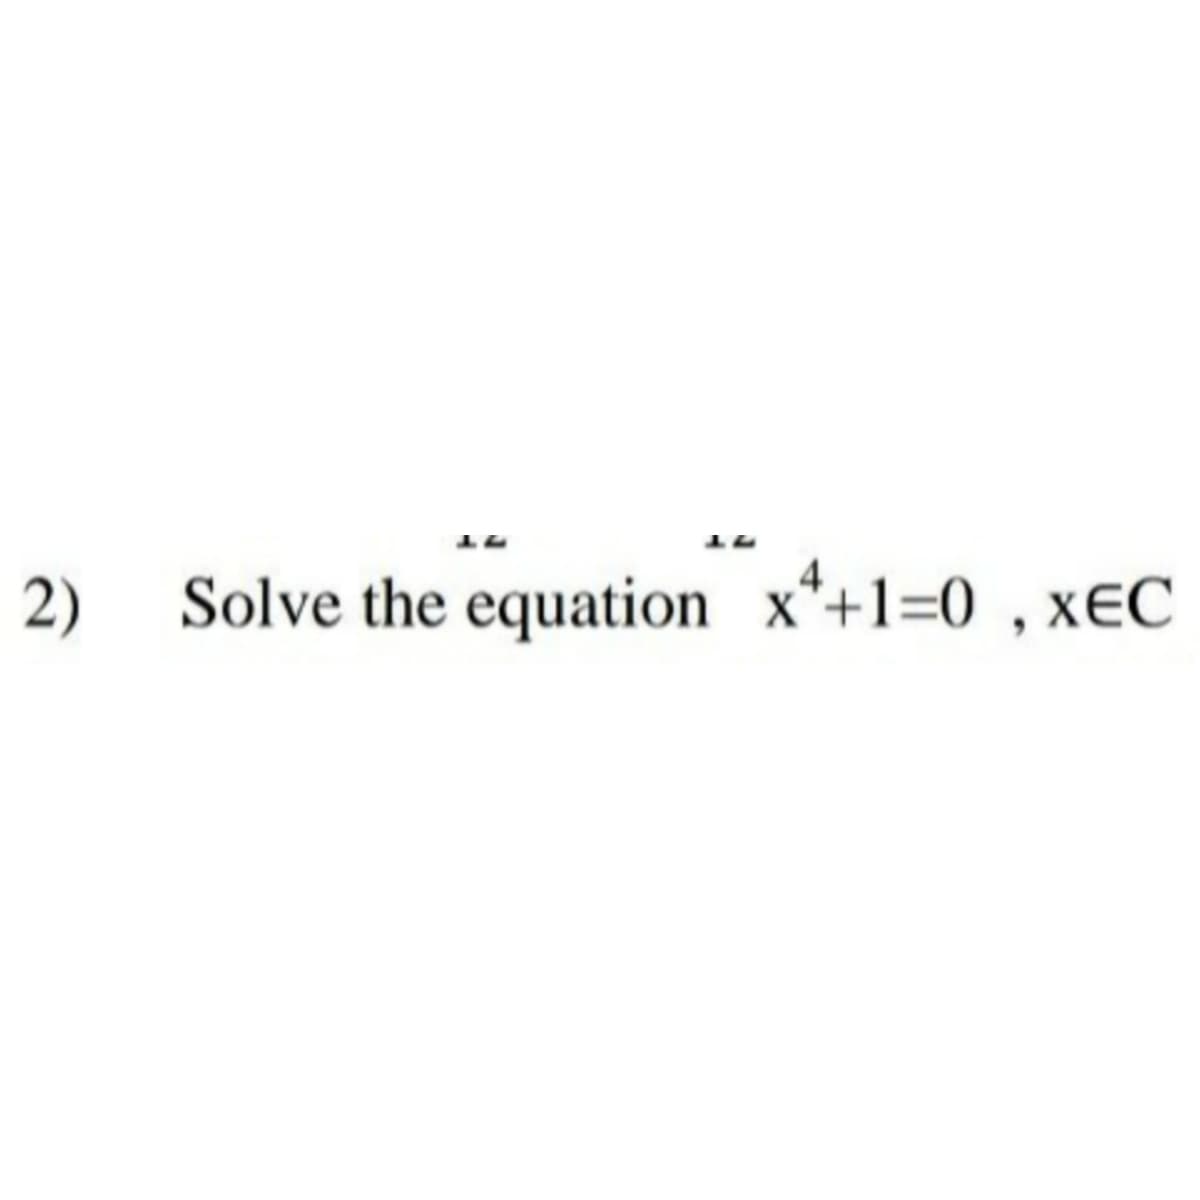 2) Solve the equation x*+1=0 , x€C
